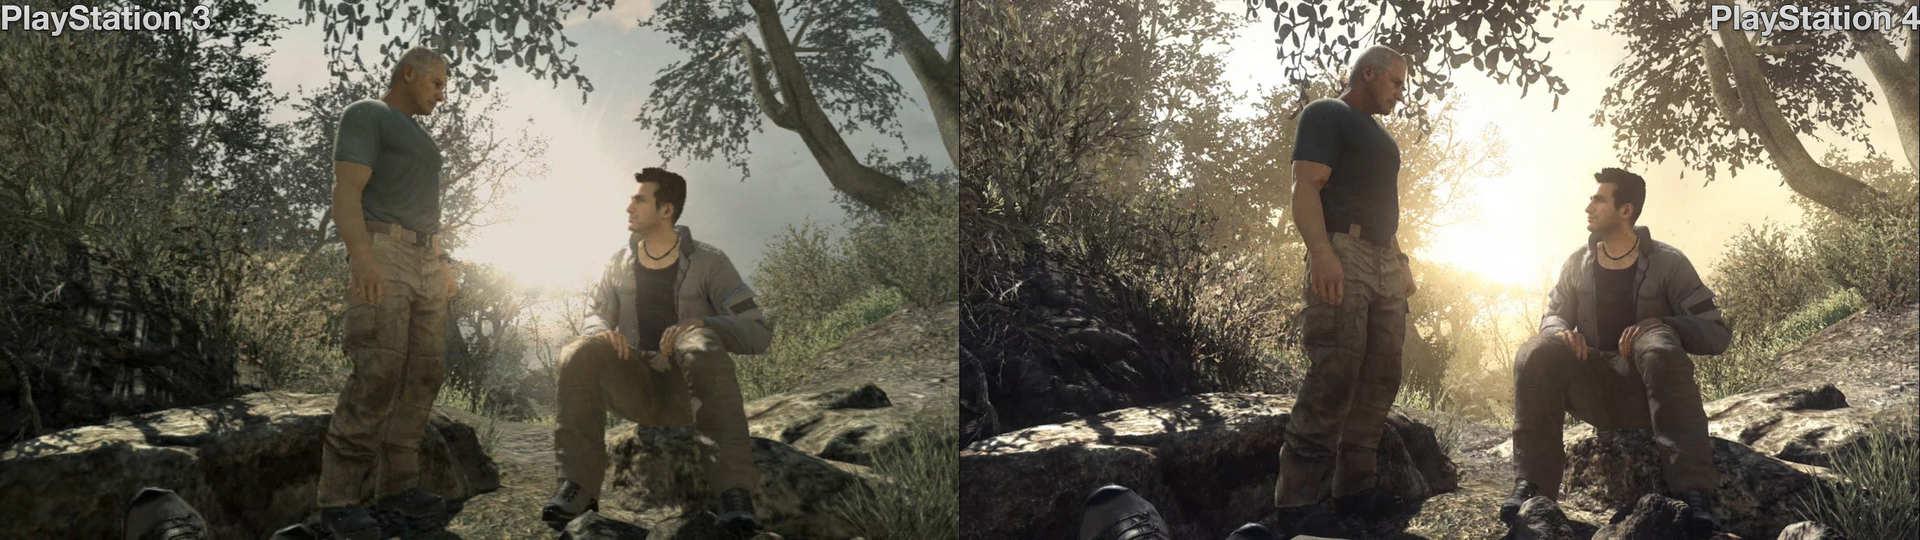 CoD Ghosts PS3 vs CoD Ghosts PS4 